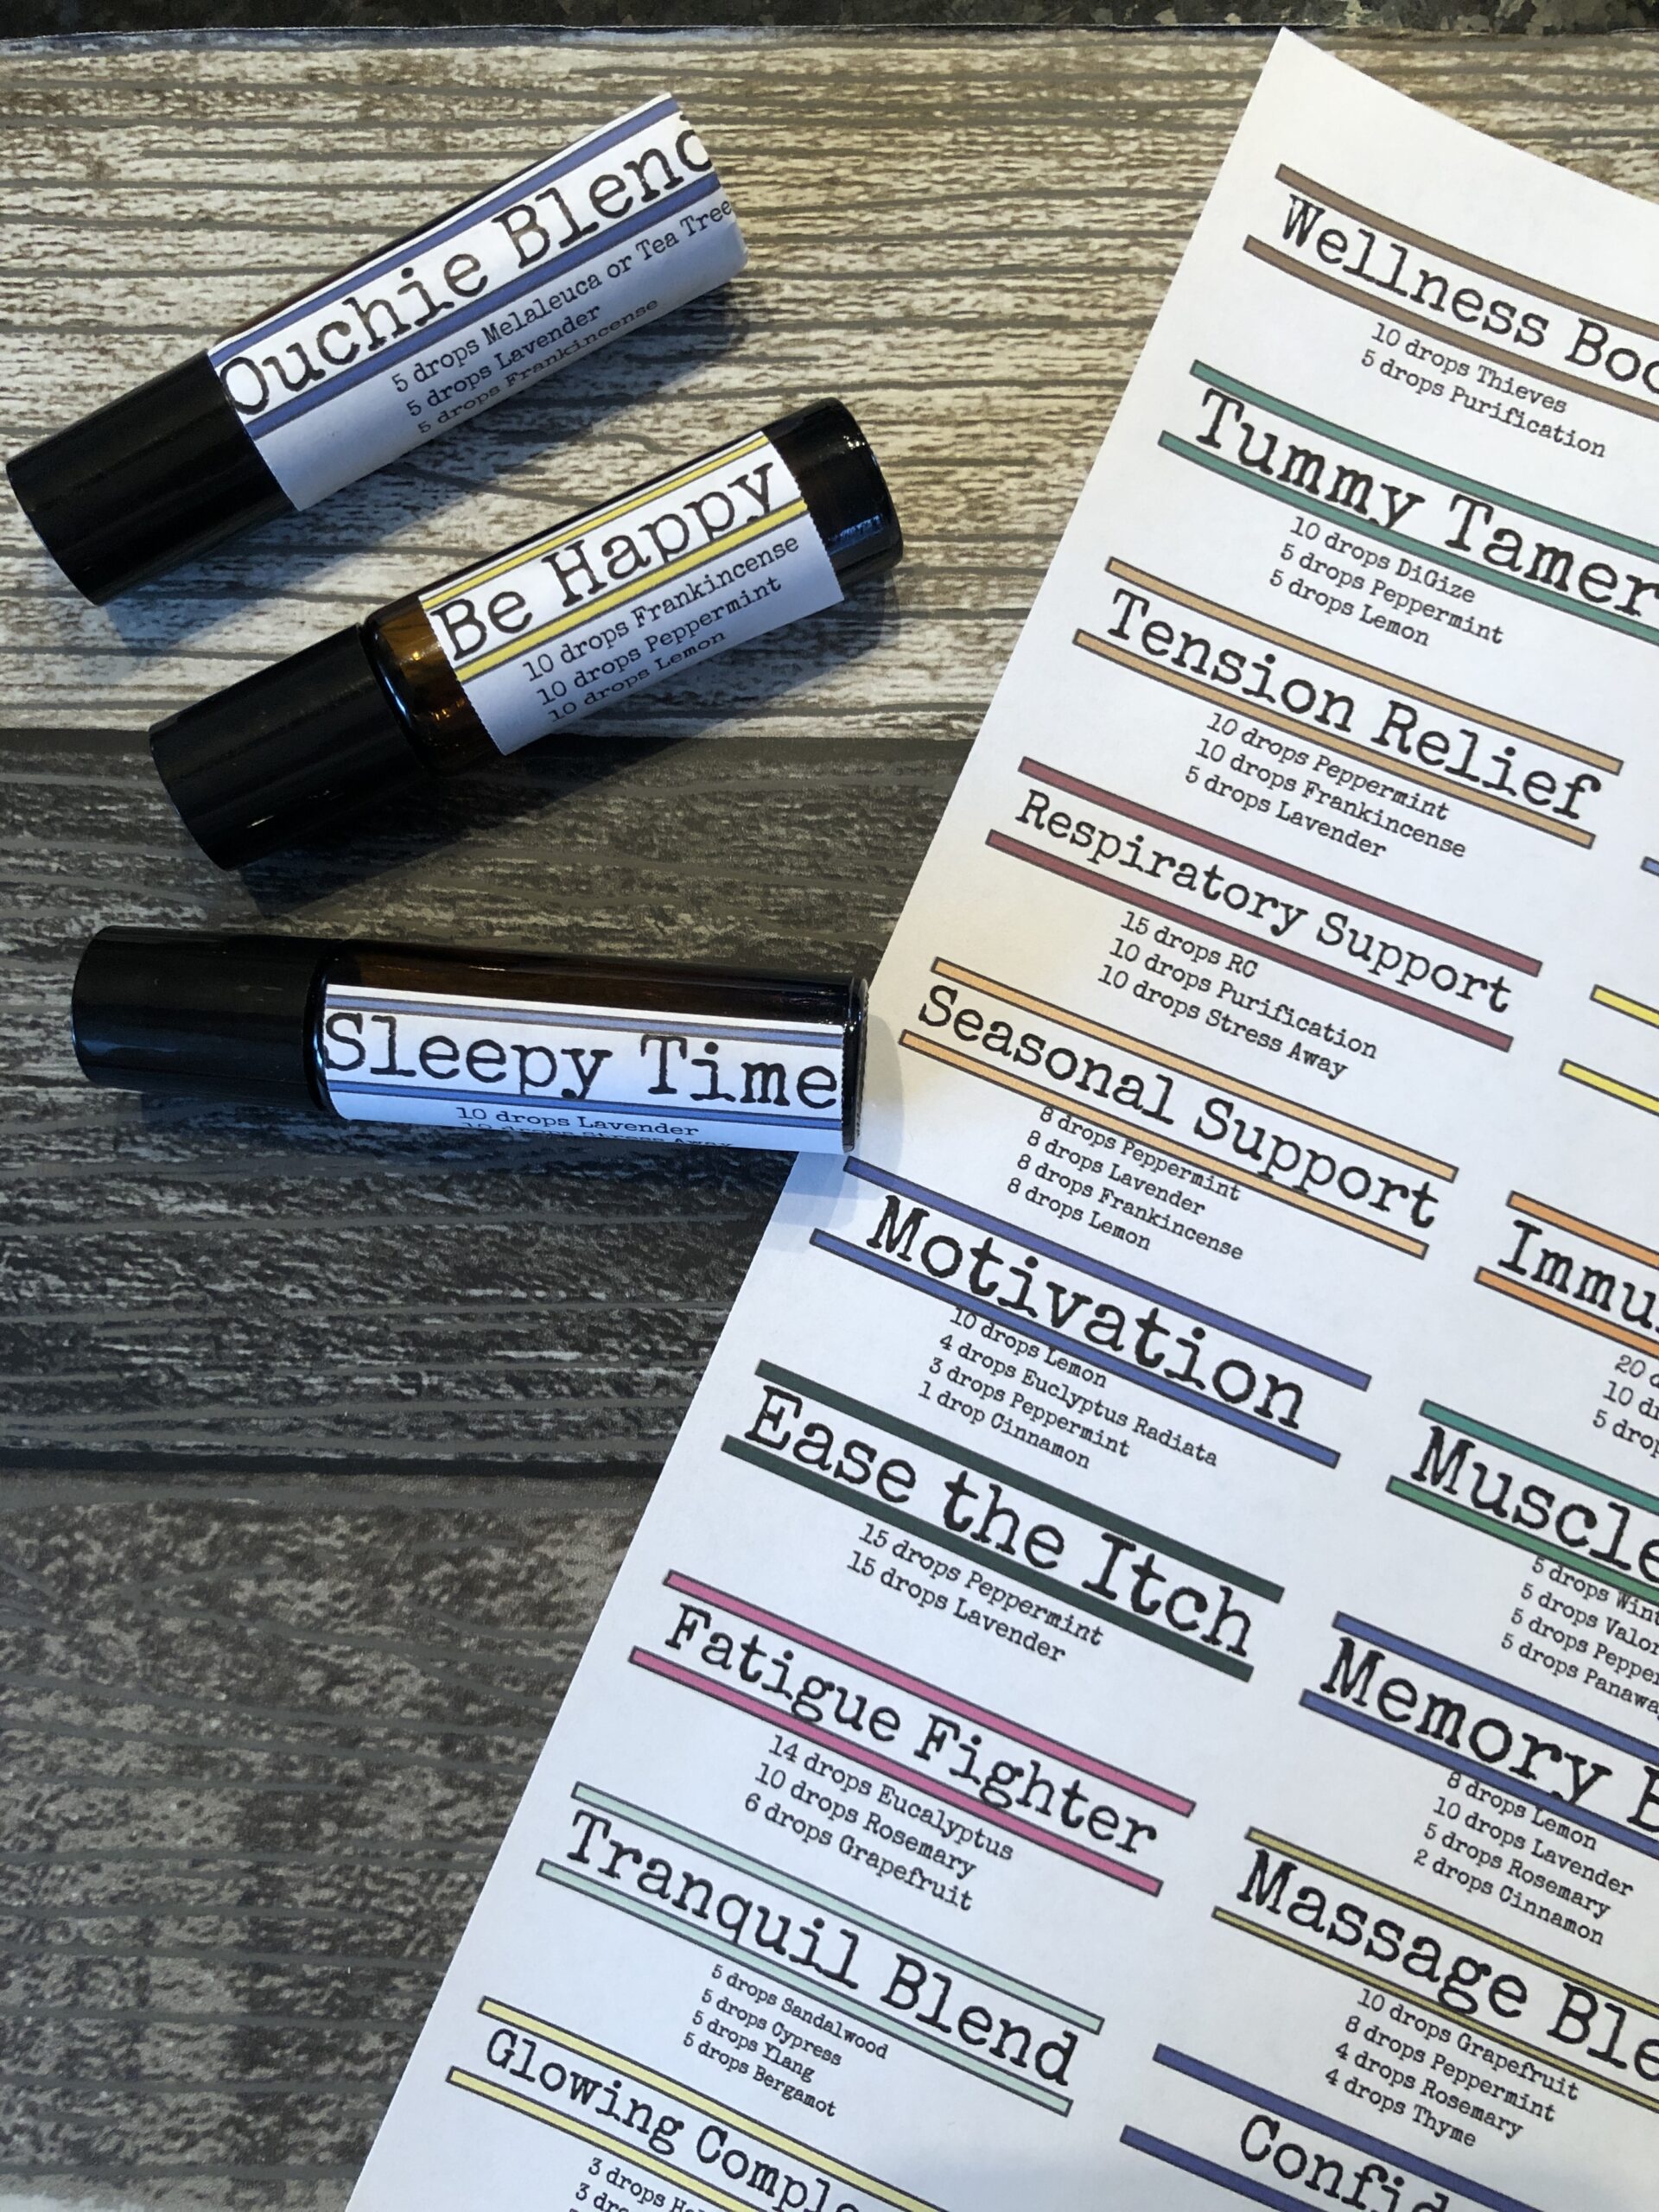 Individual “Wellness” Label for Essential Oil Roller Blend